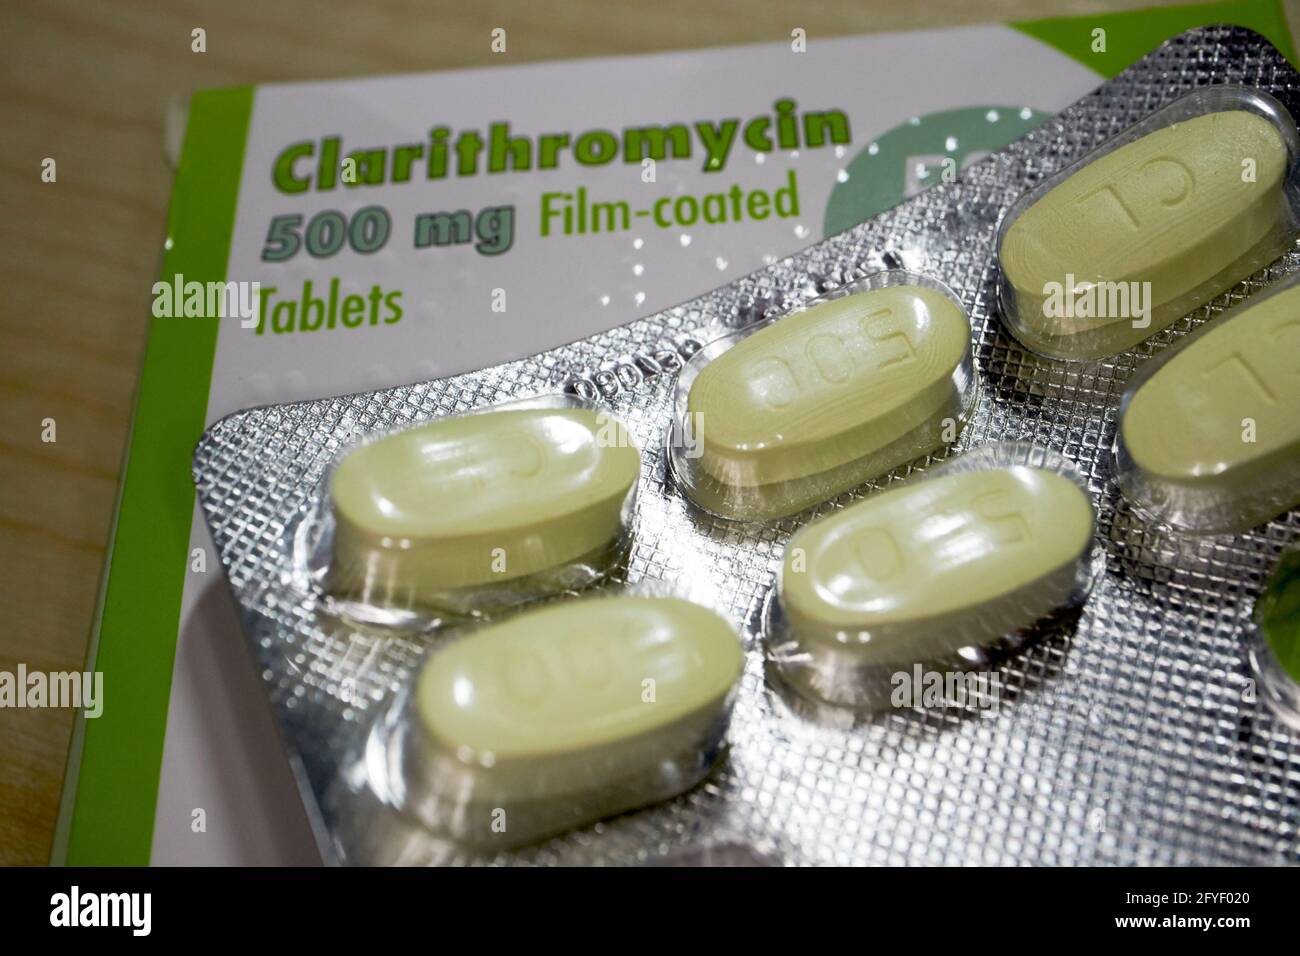 course of clarithromycin antibiotic prescription tablets in blister pack Stock Photo